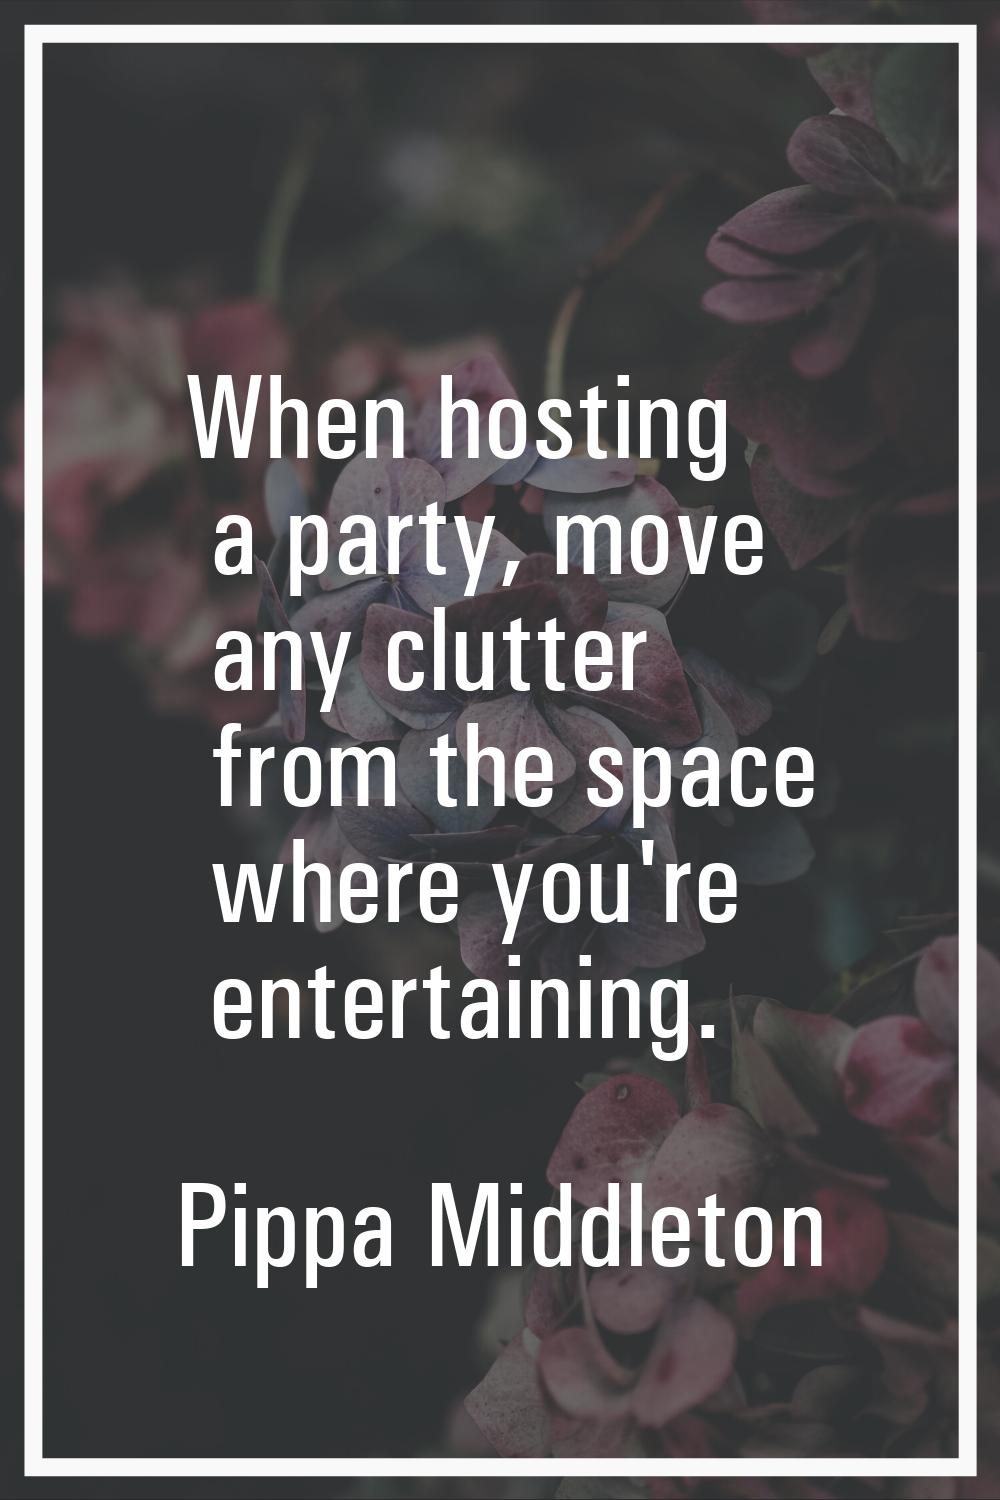 When hosting a party, move any clutter from the space where you're entertaining.